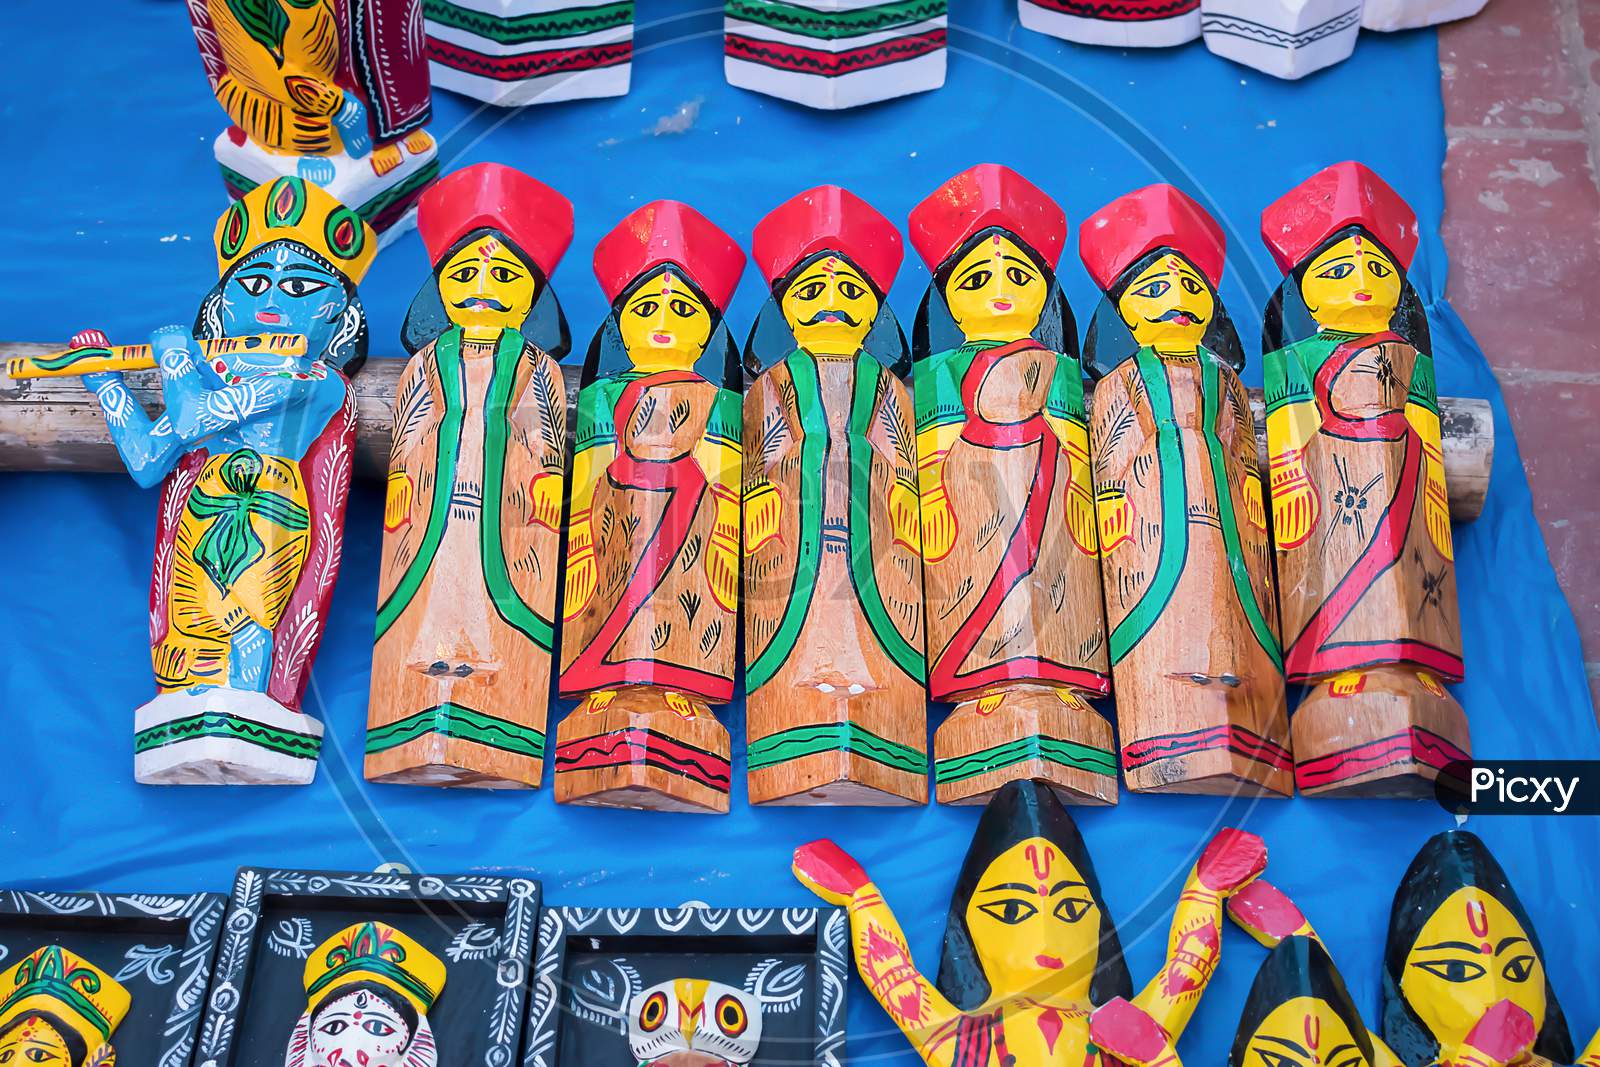 Indian Traditional Handmade Wooden Toys Are Displayed In A Street Shop For Sale. Indian Handicraft And Art